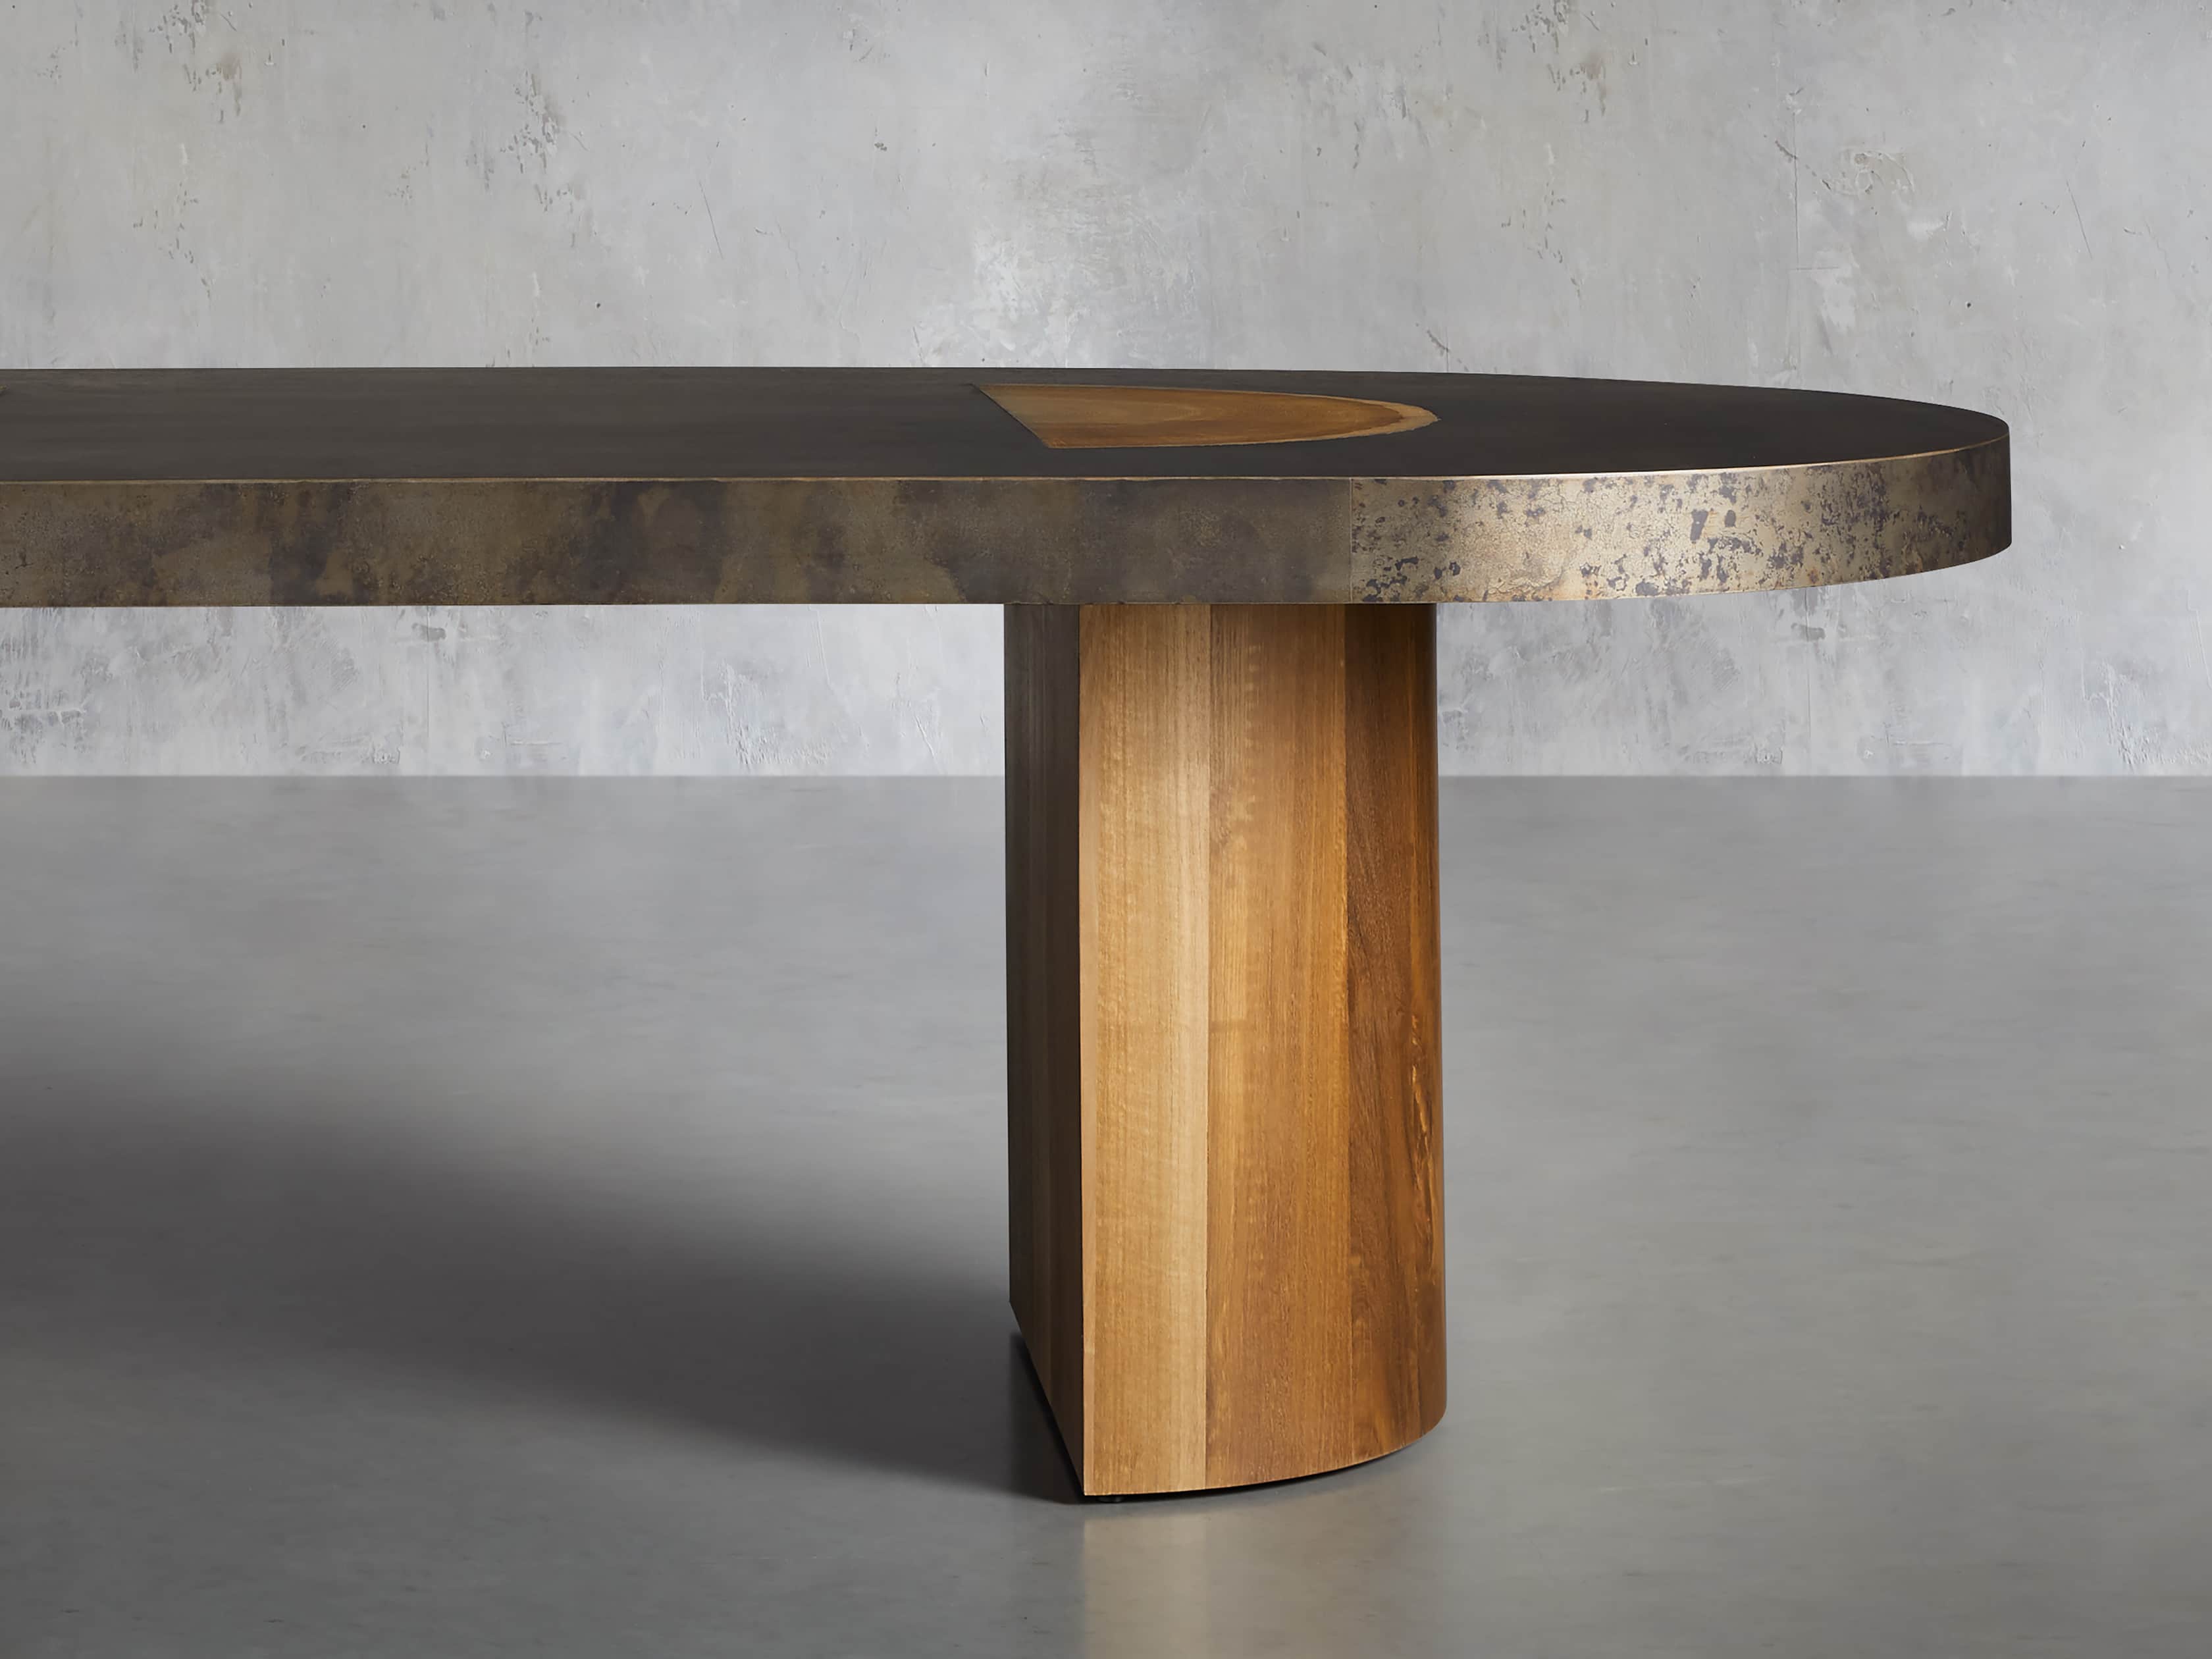 View the Acacius Oval Dining Table